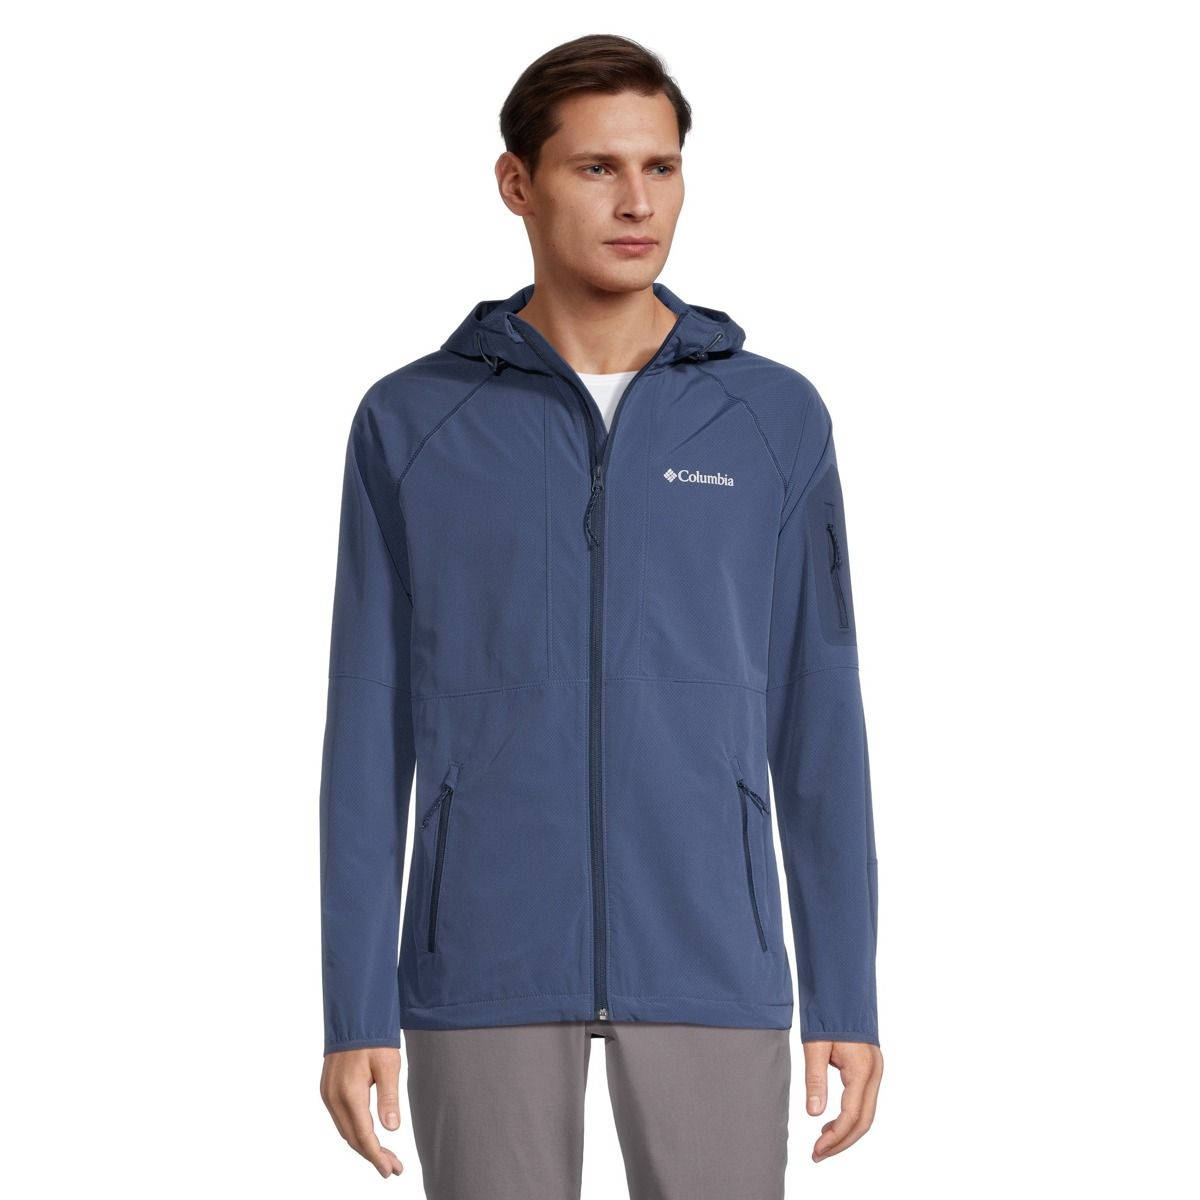 Image of Columbia Men's Tall Heights Water Resistant Hooded Softshell Jacket